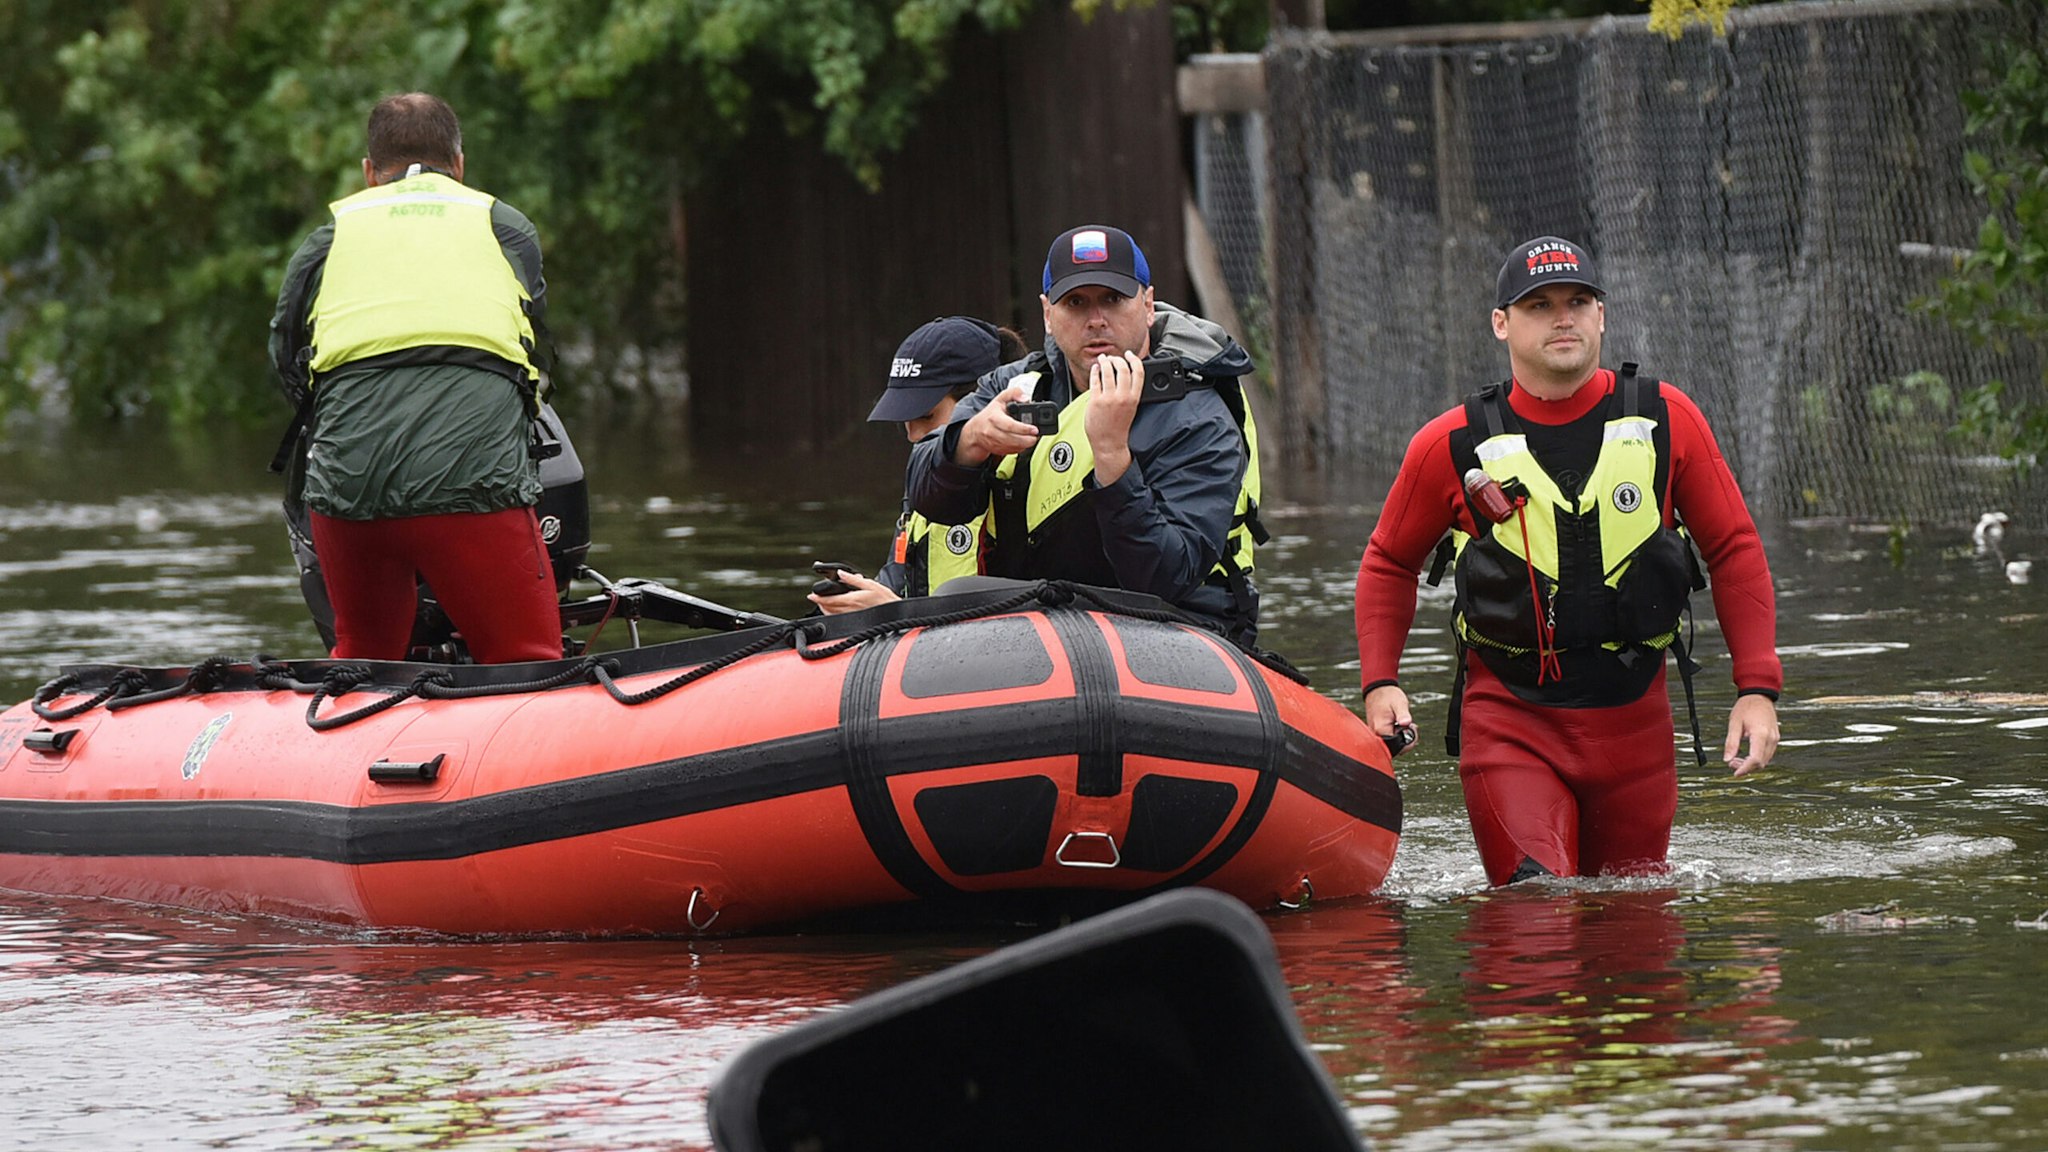 Orange County Fire rescue unit members work in a flooded neighborhood in the aftermath of Hurricane Ian on September 29, 2022 in Orlando, Florida. The storm has caused widespread power outages and flash flooding in Central Florida as it crossed through the state after making landfall in the Fort Myers area as a Category 4 hurricane.